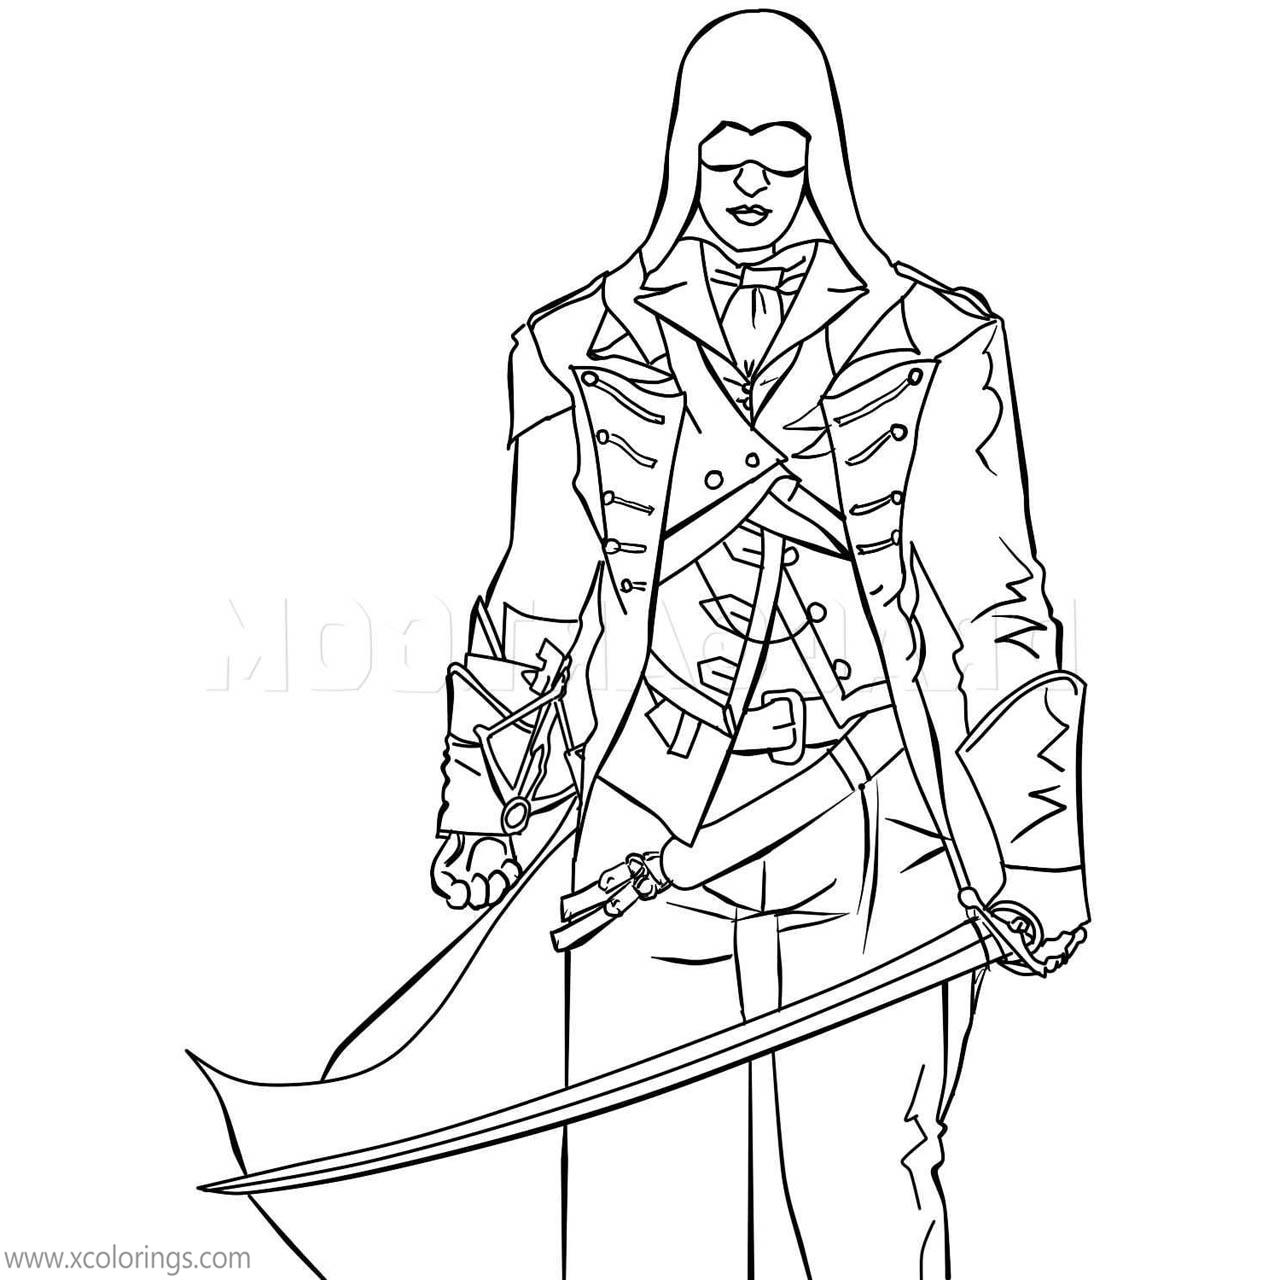 Free Assassin's Creed Coloring Pages Arno Victor Dorian printable